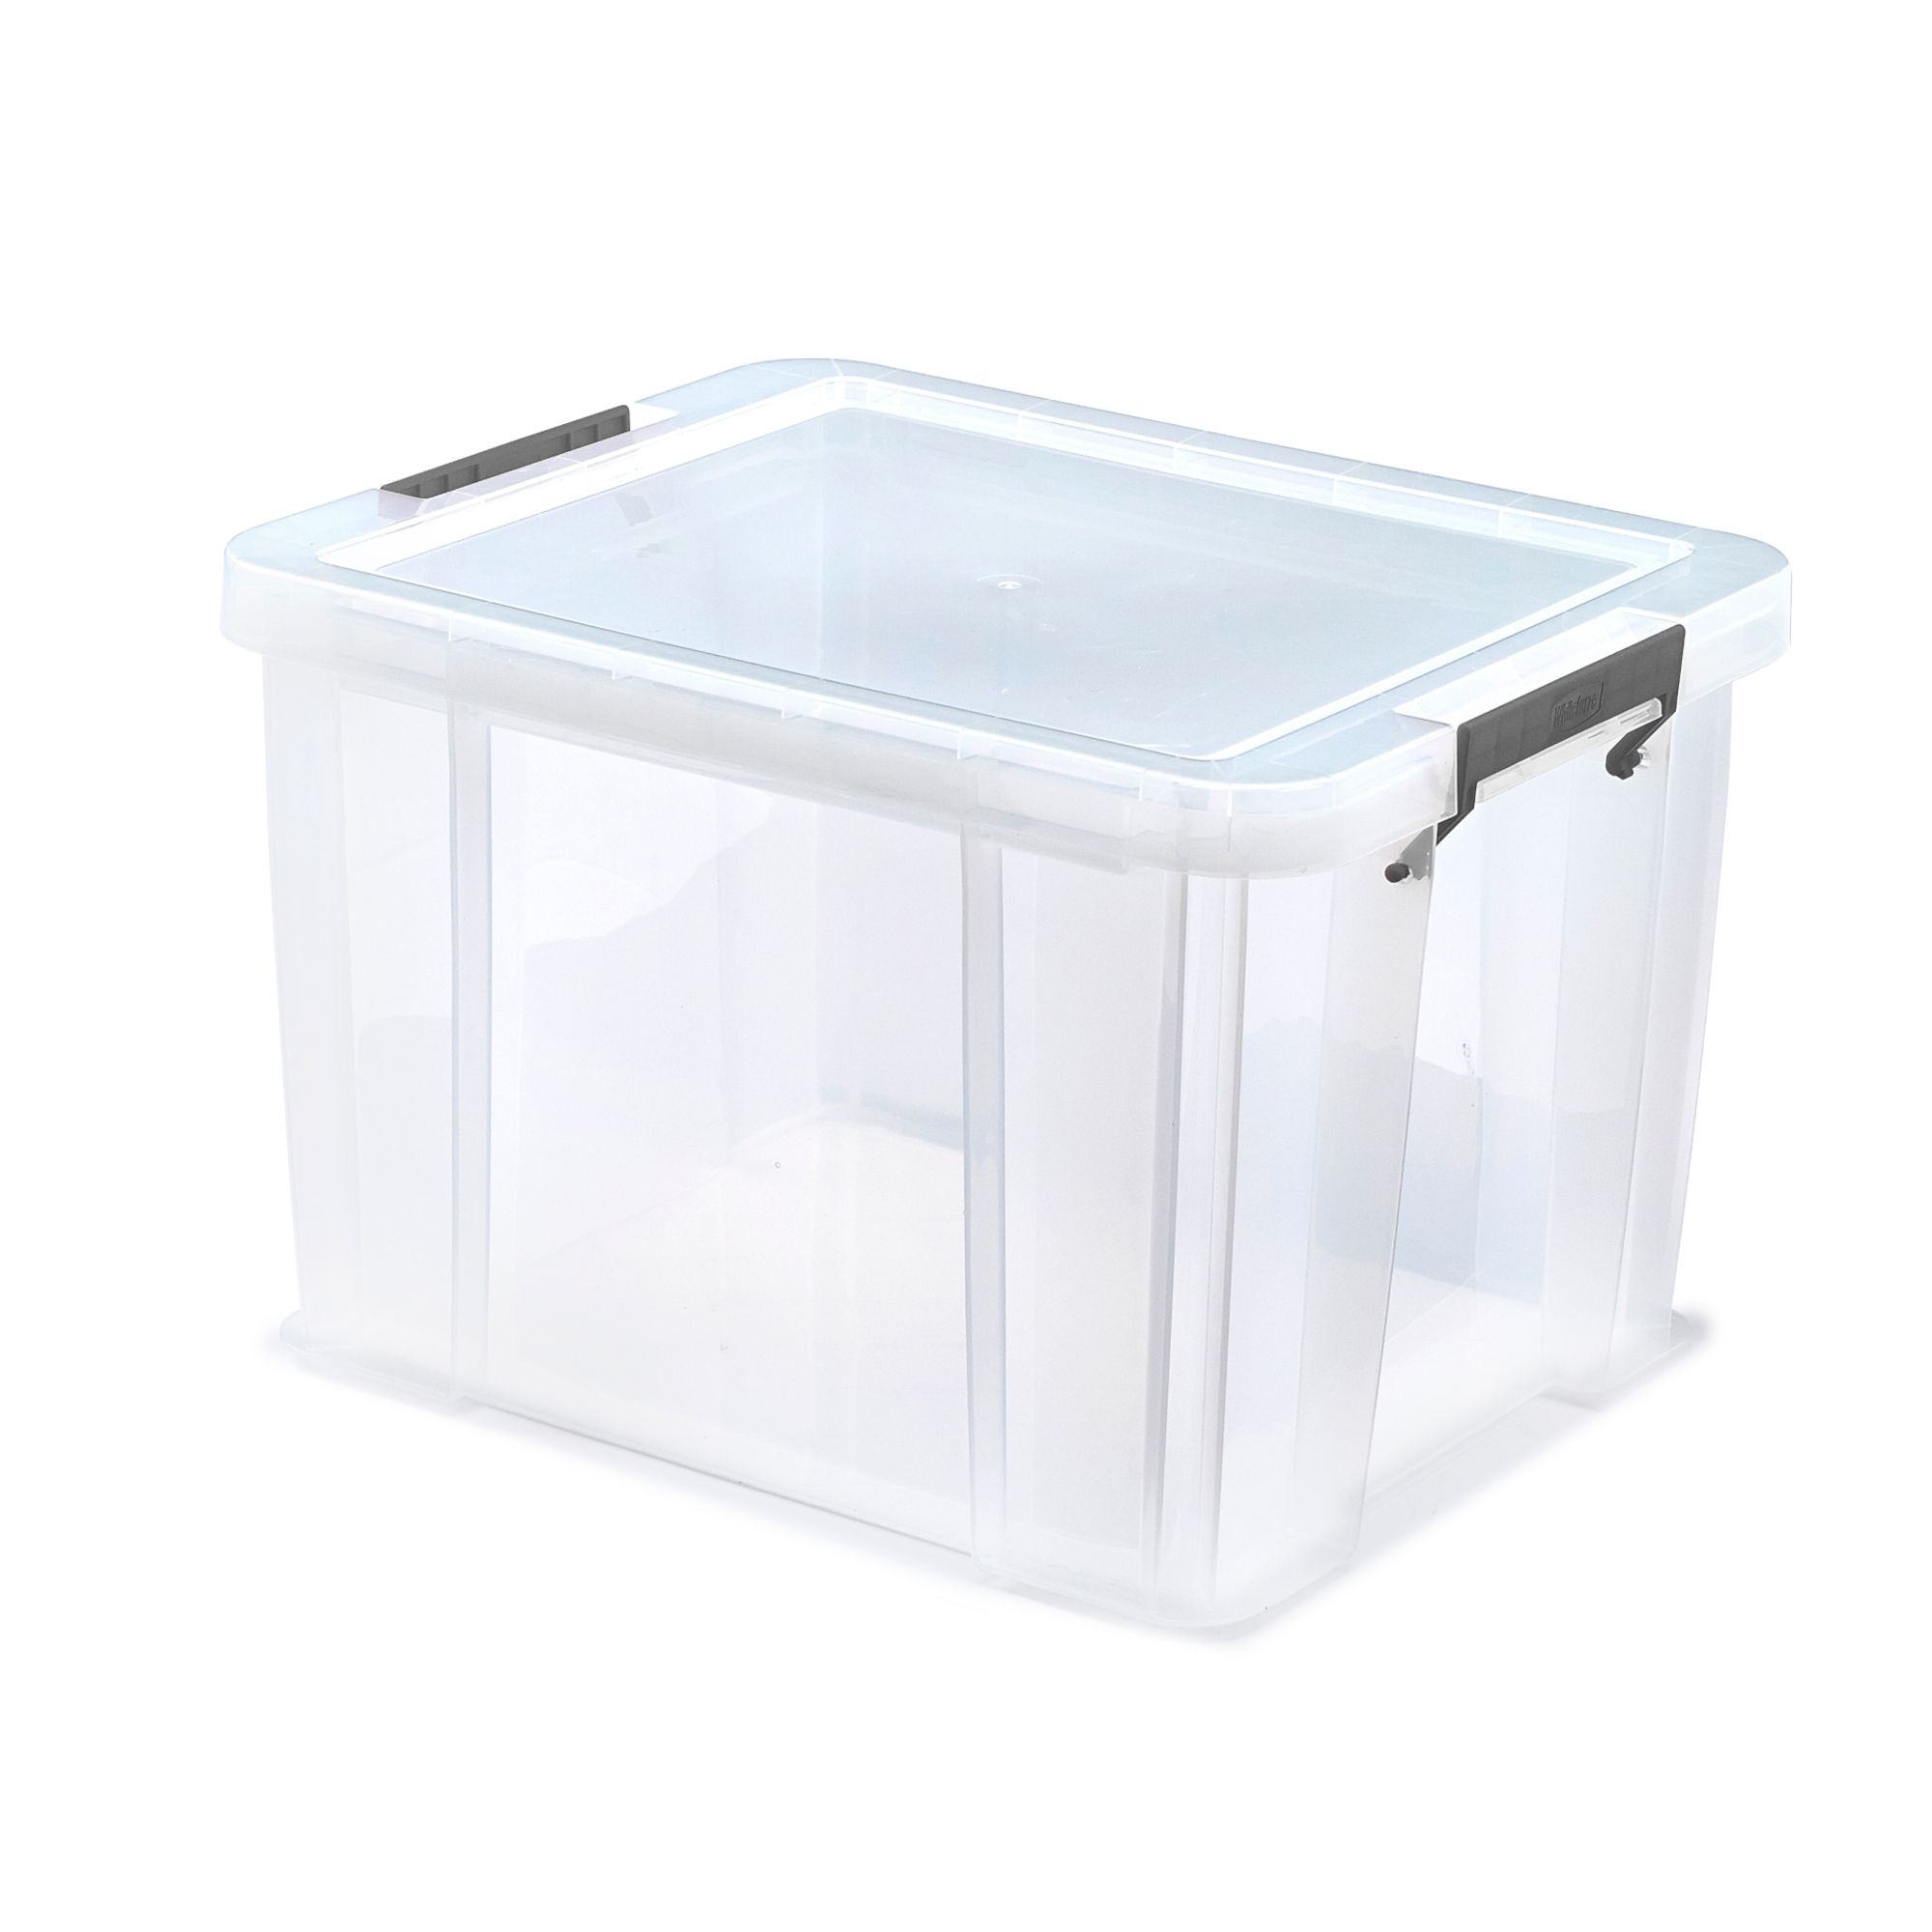 https://media.diy.com/is/image/Kingfisher/allstore-heavy-duty-36l-large-plastic-stackable-storage-box-with-lid~5016447039393_01c?$MOB_PREV$&$width=618&$height=618